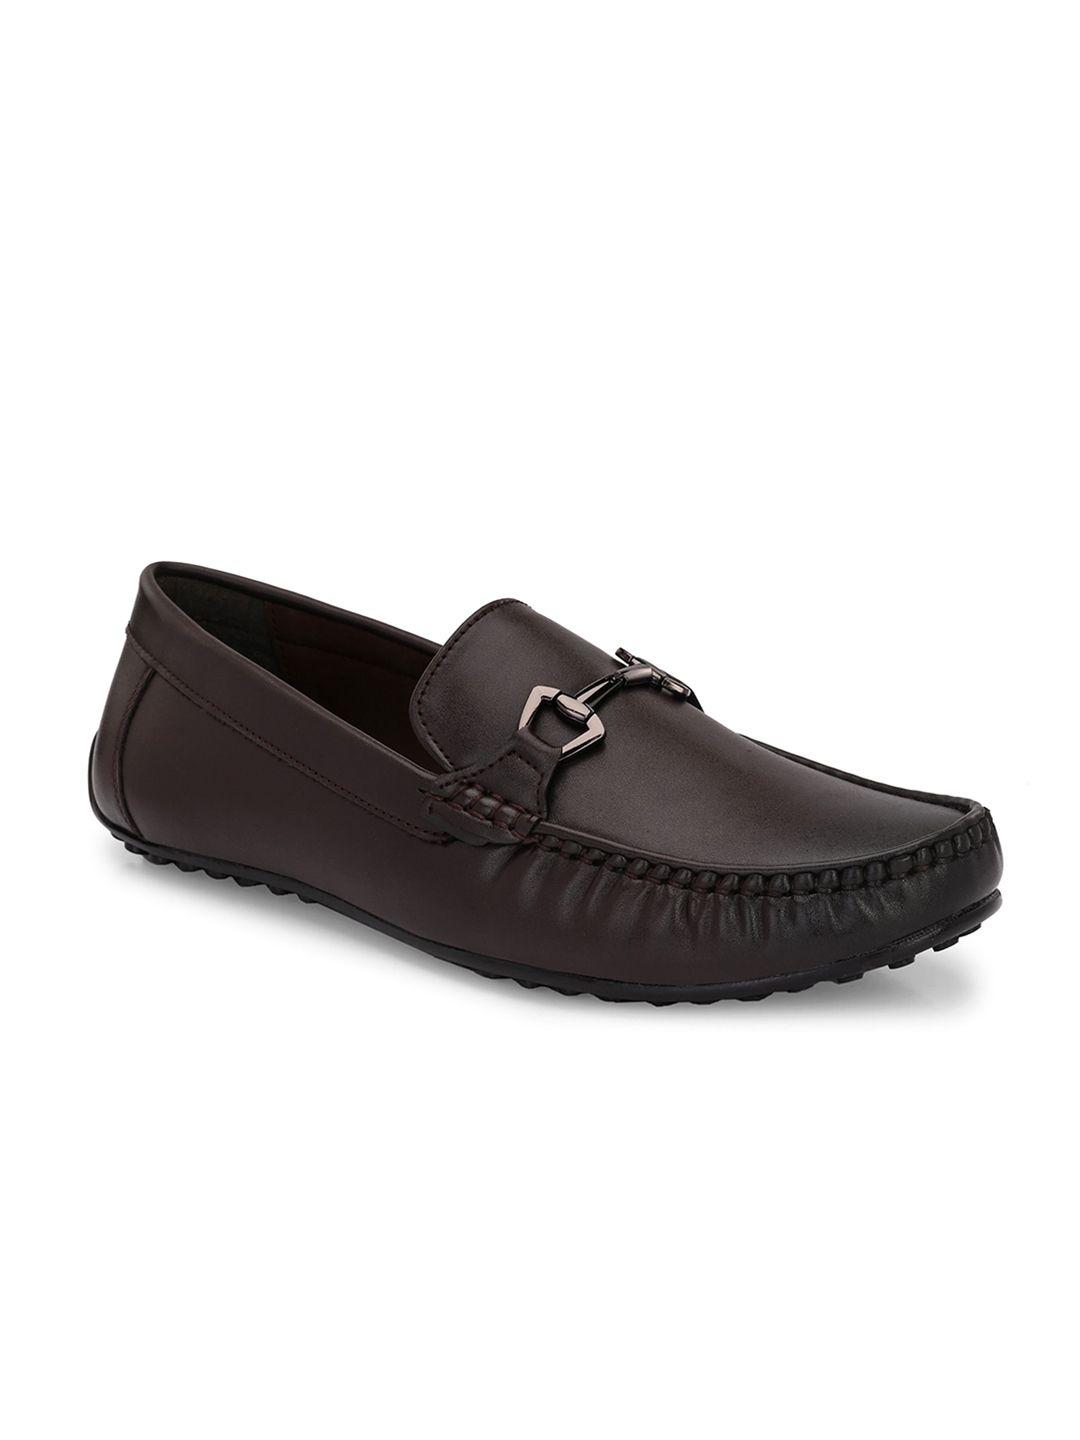 eego italy men slip-on loafers